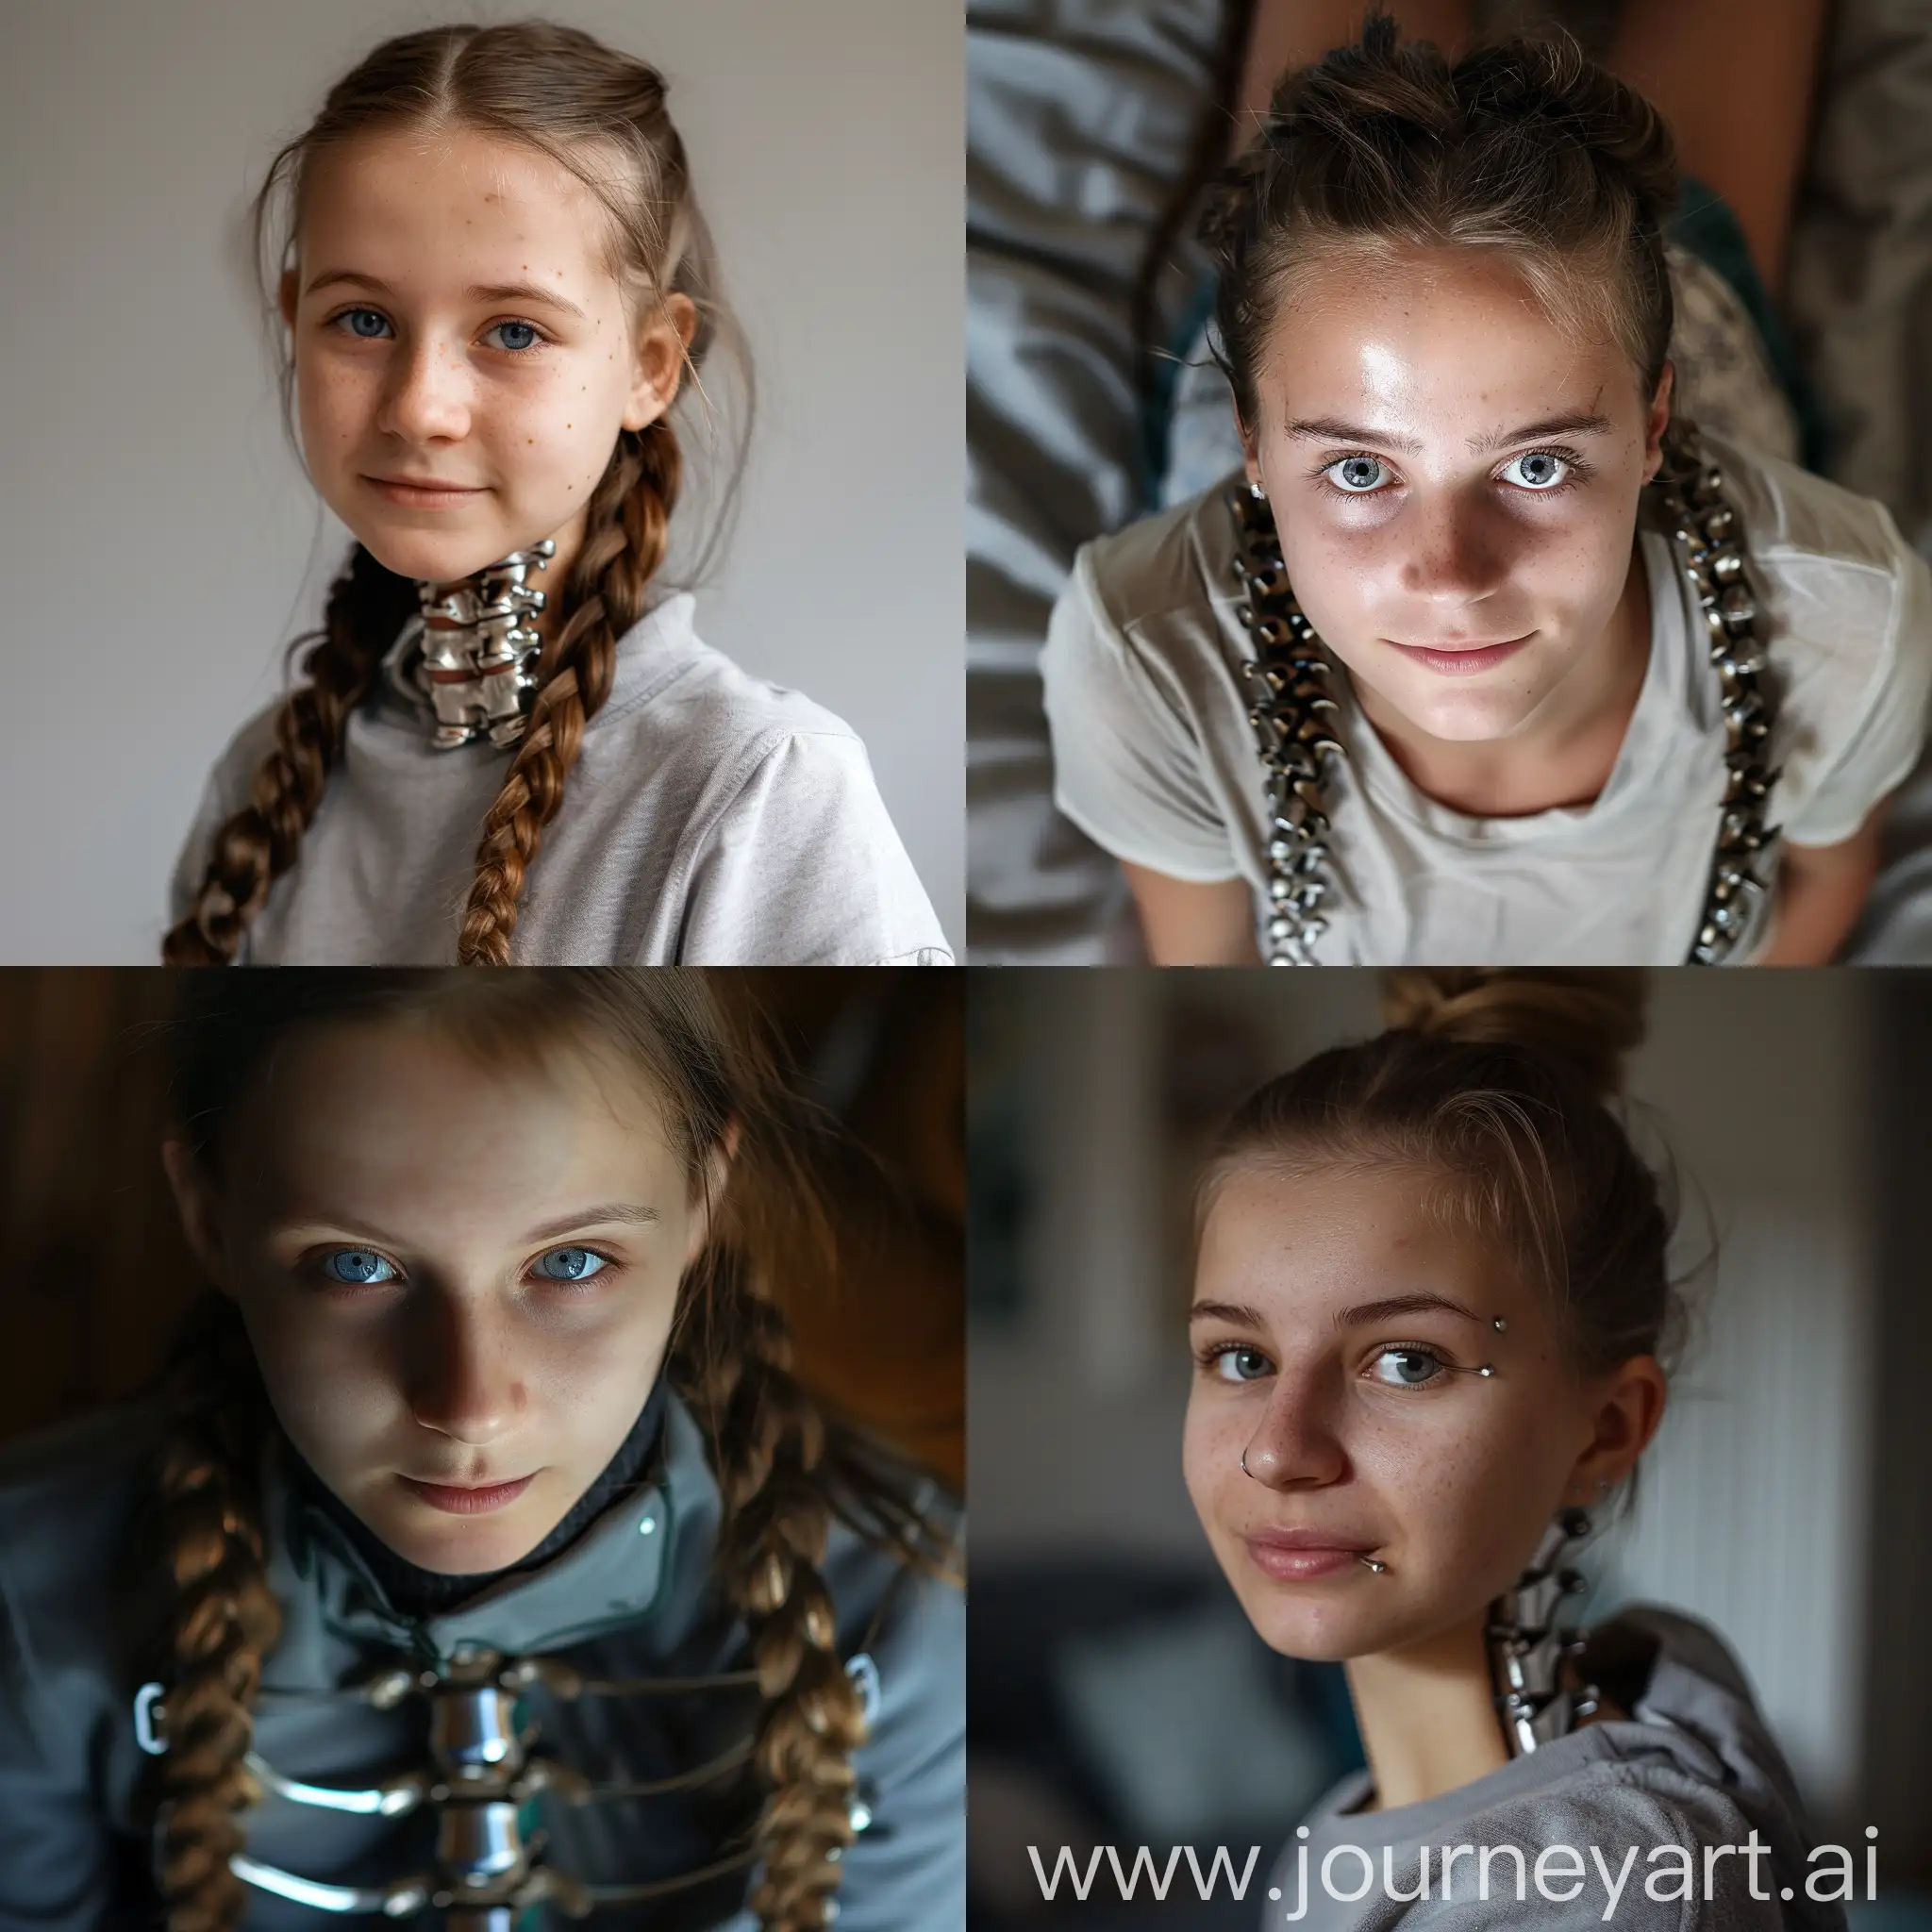 Courageous-Girl-with-Titanium-Spine-Facing-the-Camera